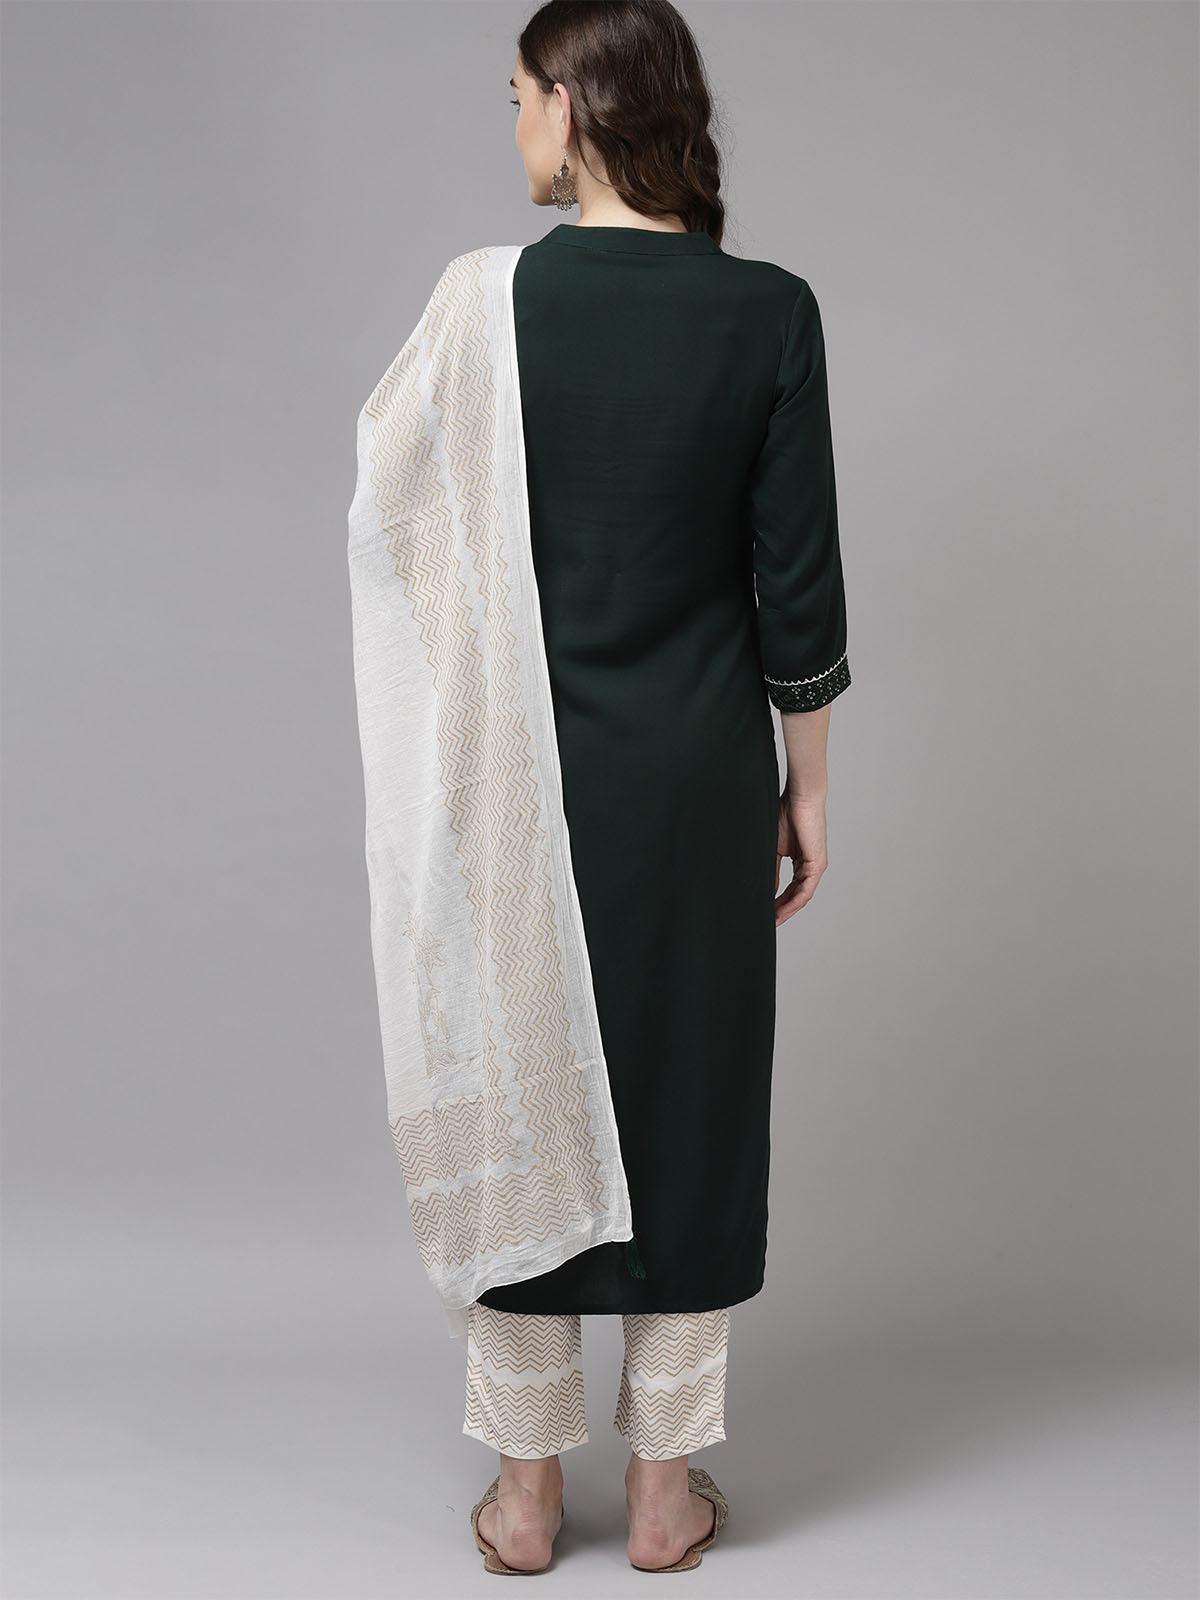 Green Embroidered Straight Kurta Trouser With Dupatta Set - Odette